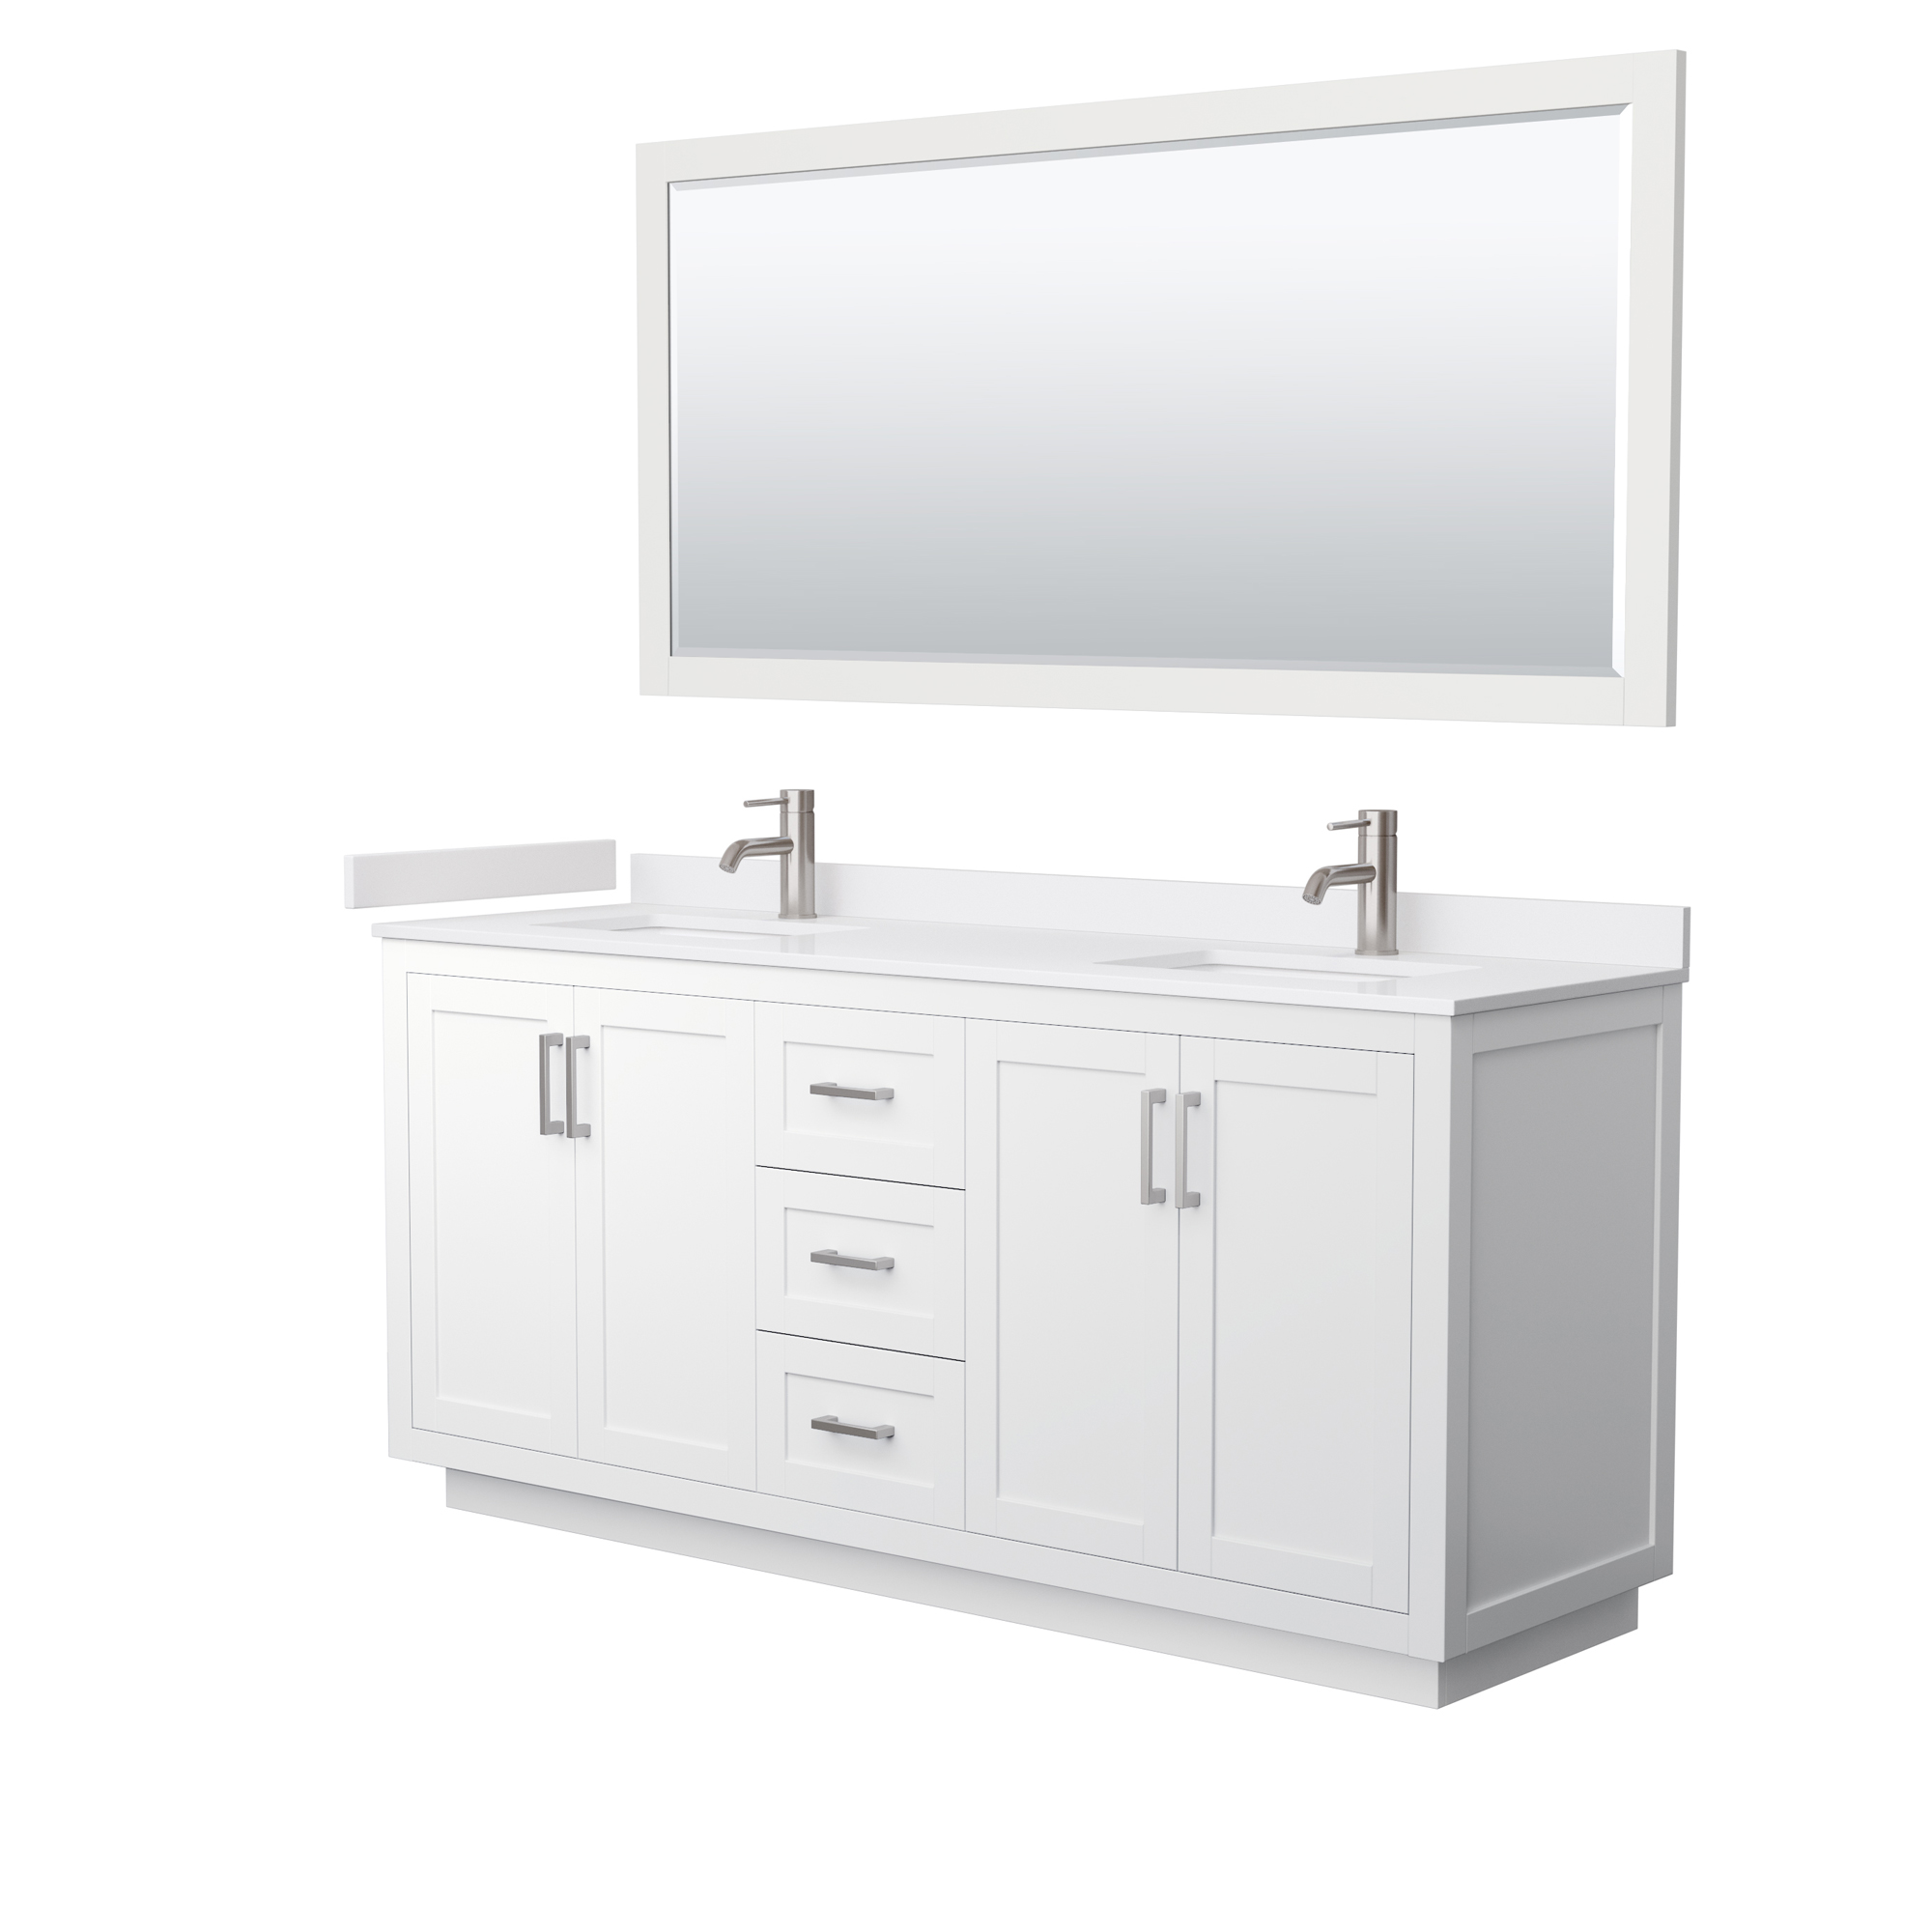 Miranda 72" Double Vanity with Cultured Marble Counter - White WC-2929-72-DBL-VAN-WHT-